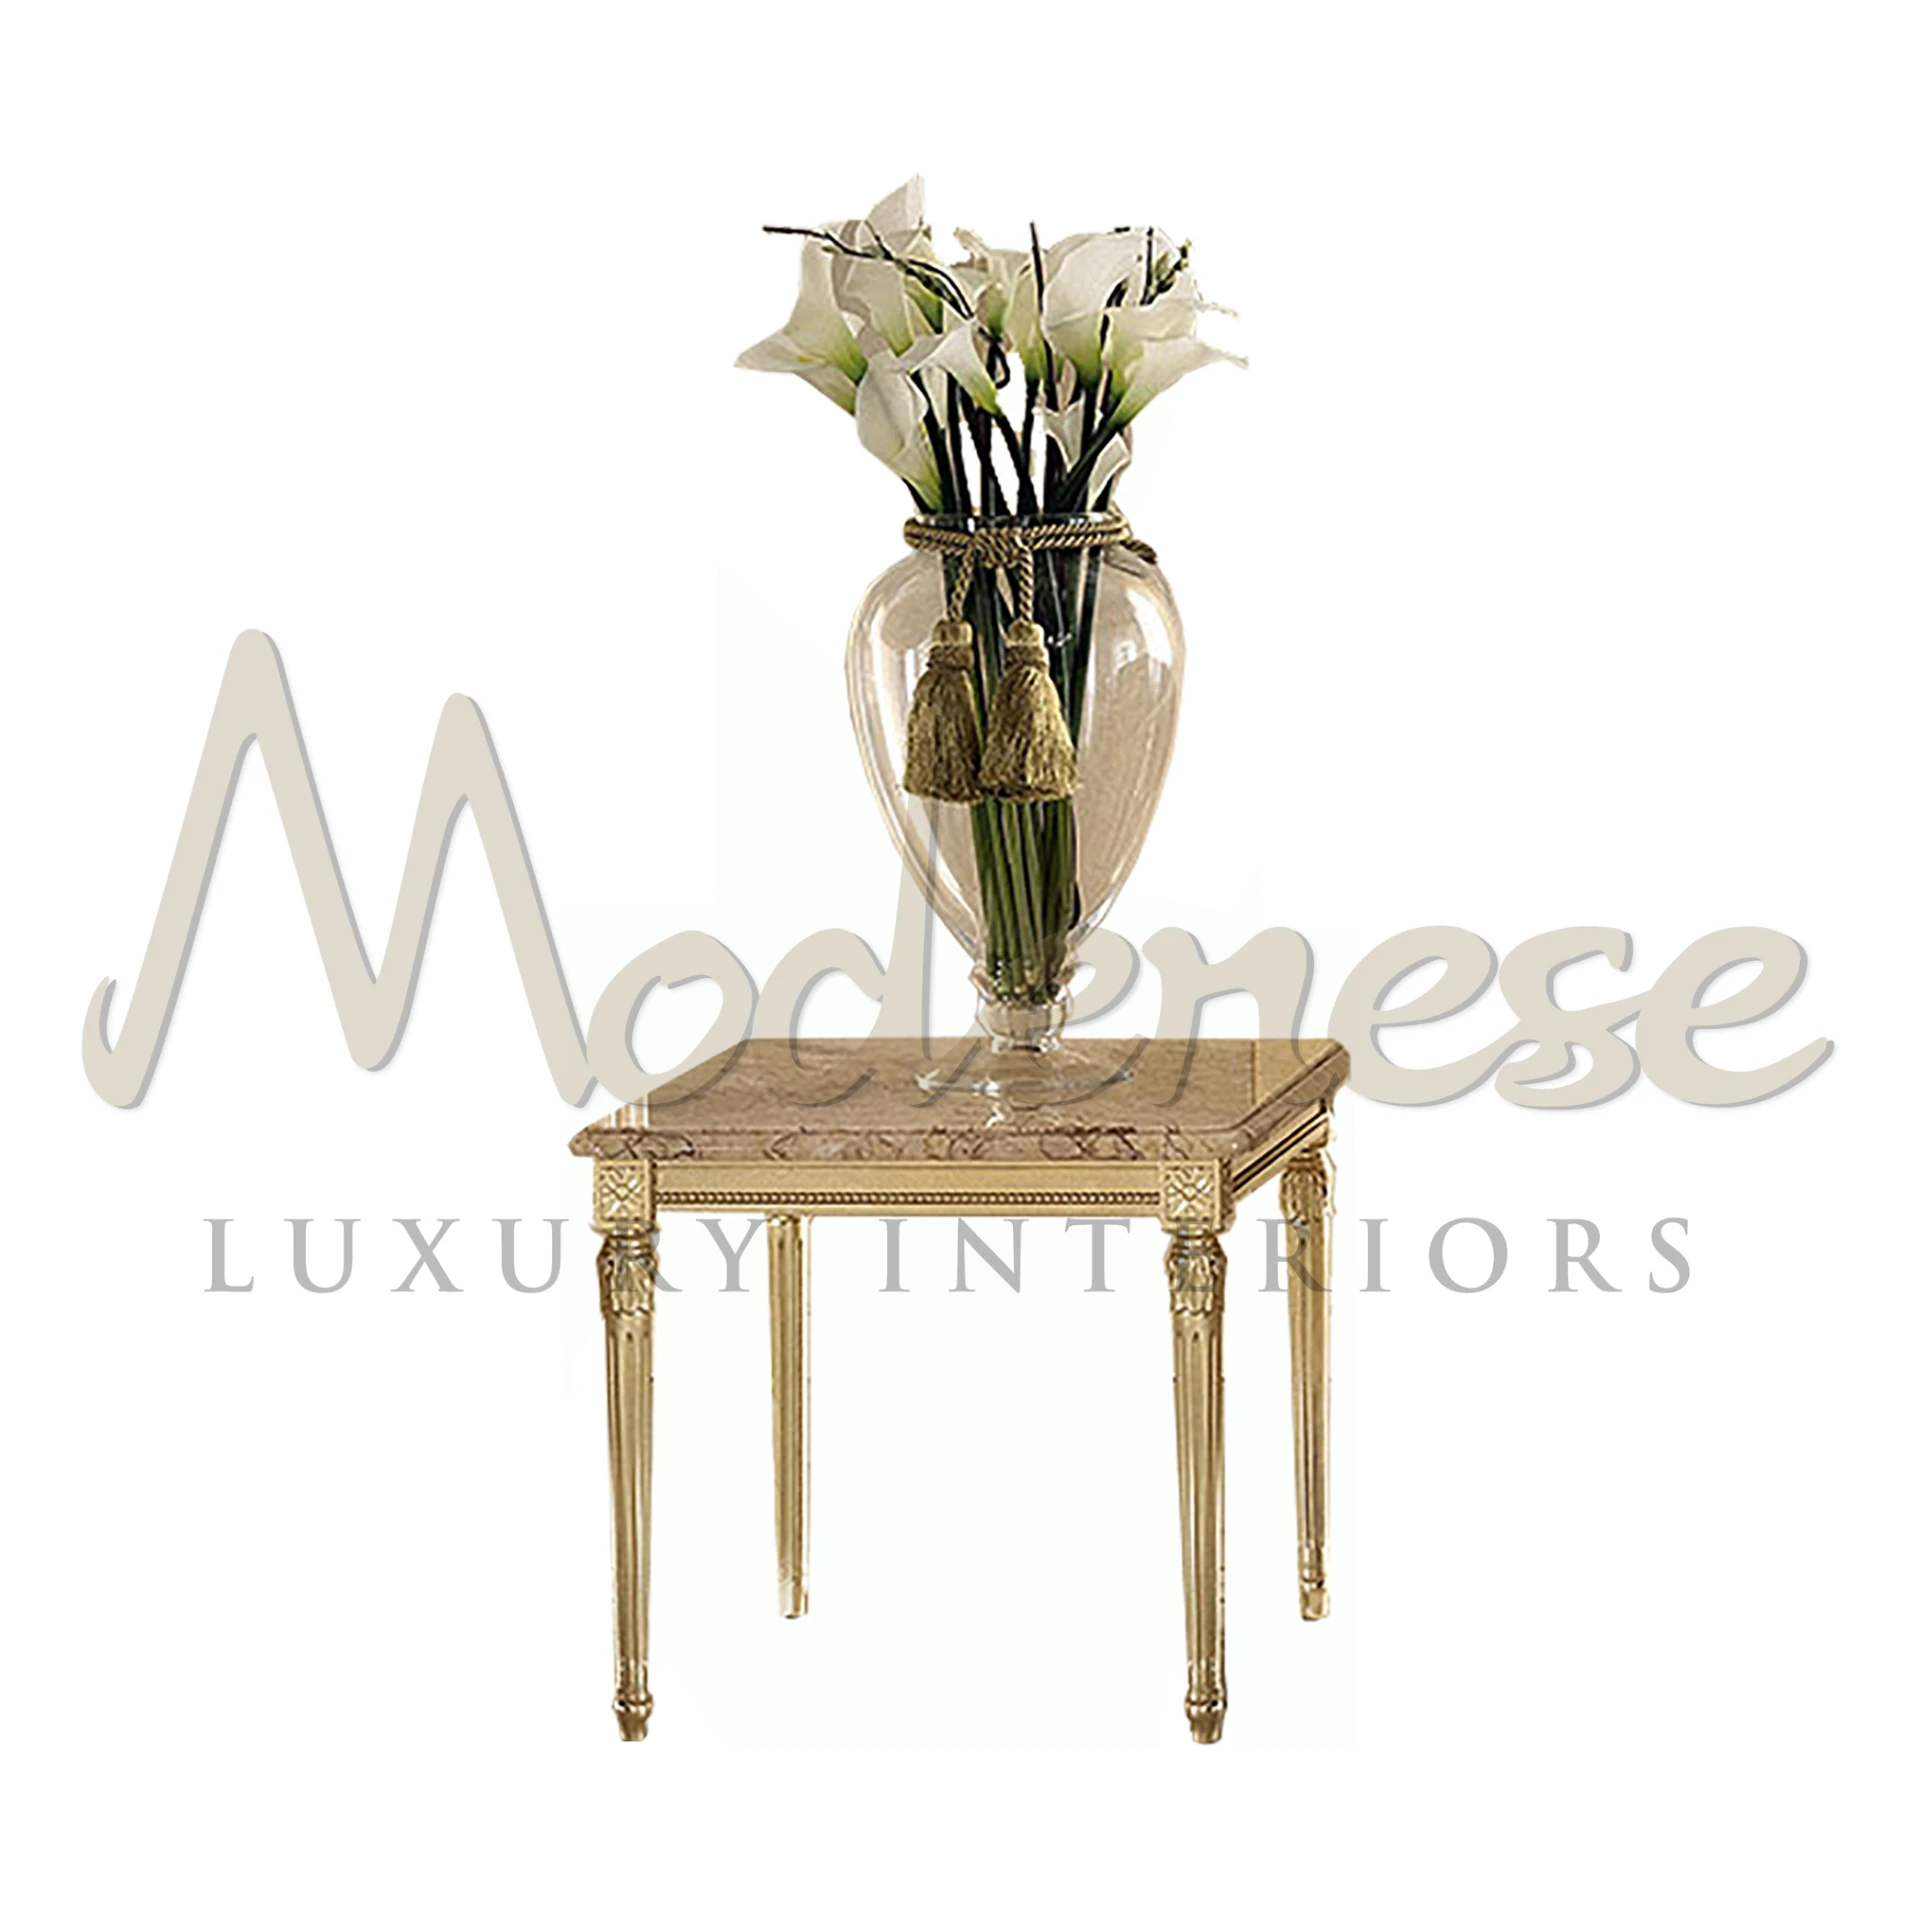 Luxurious Imperial Square Gold Leaf Coffee Table: Opulence Personified